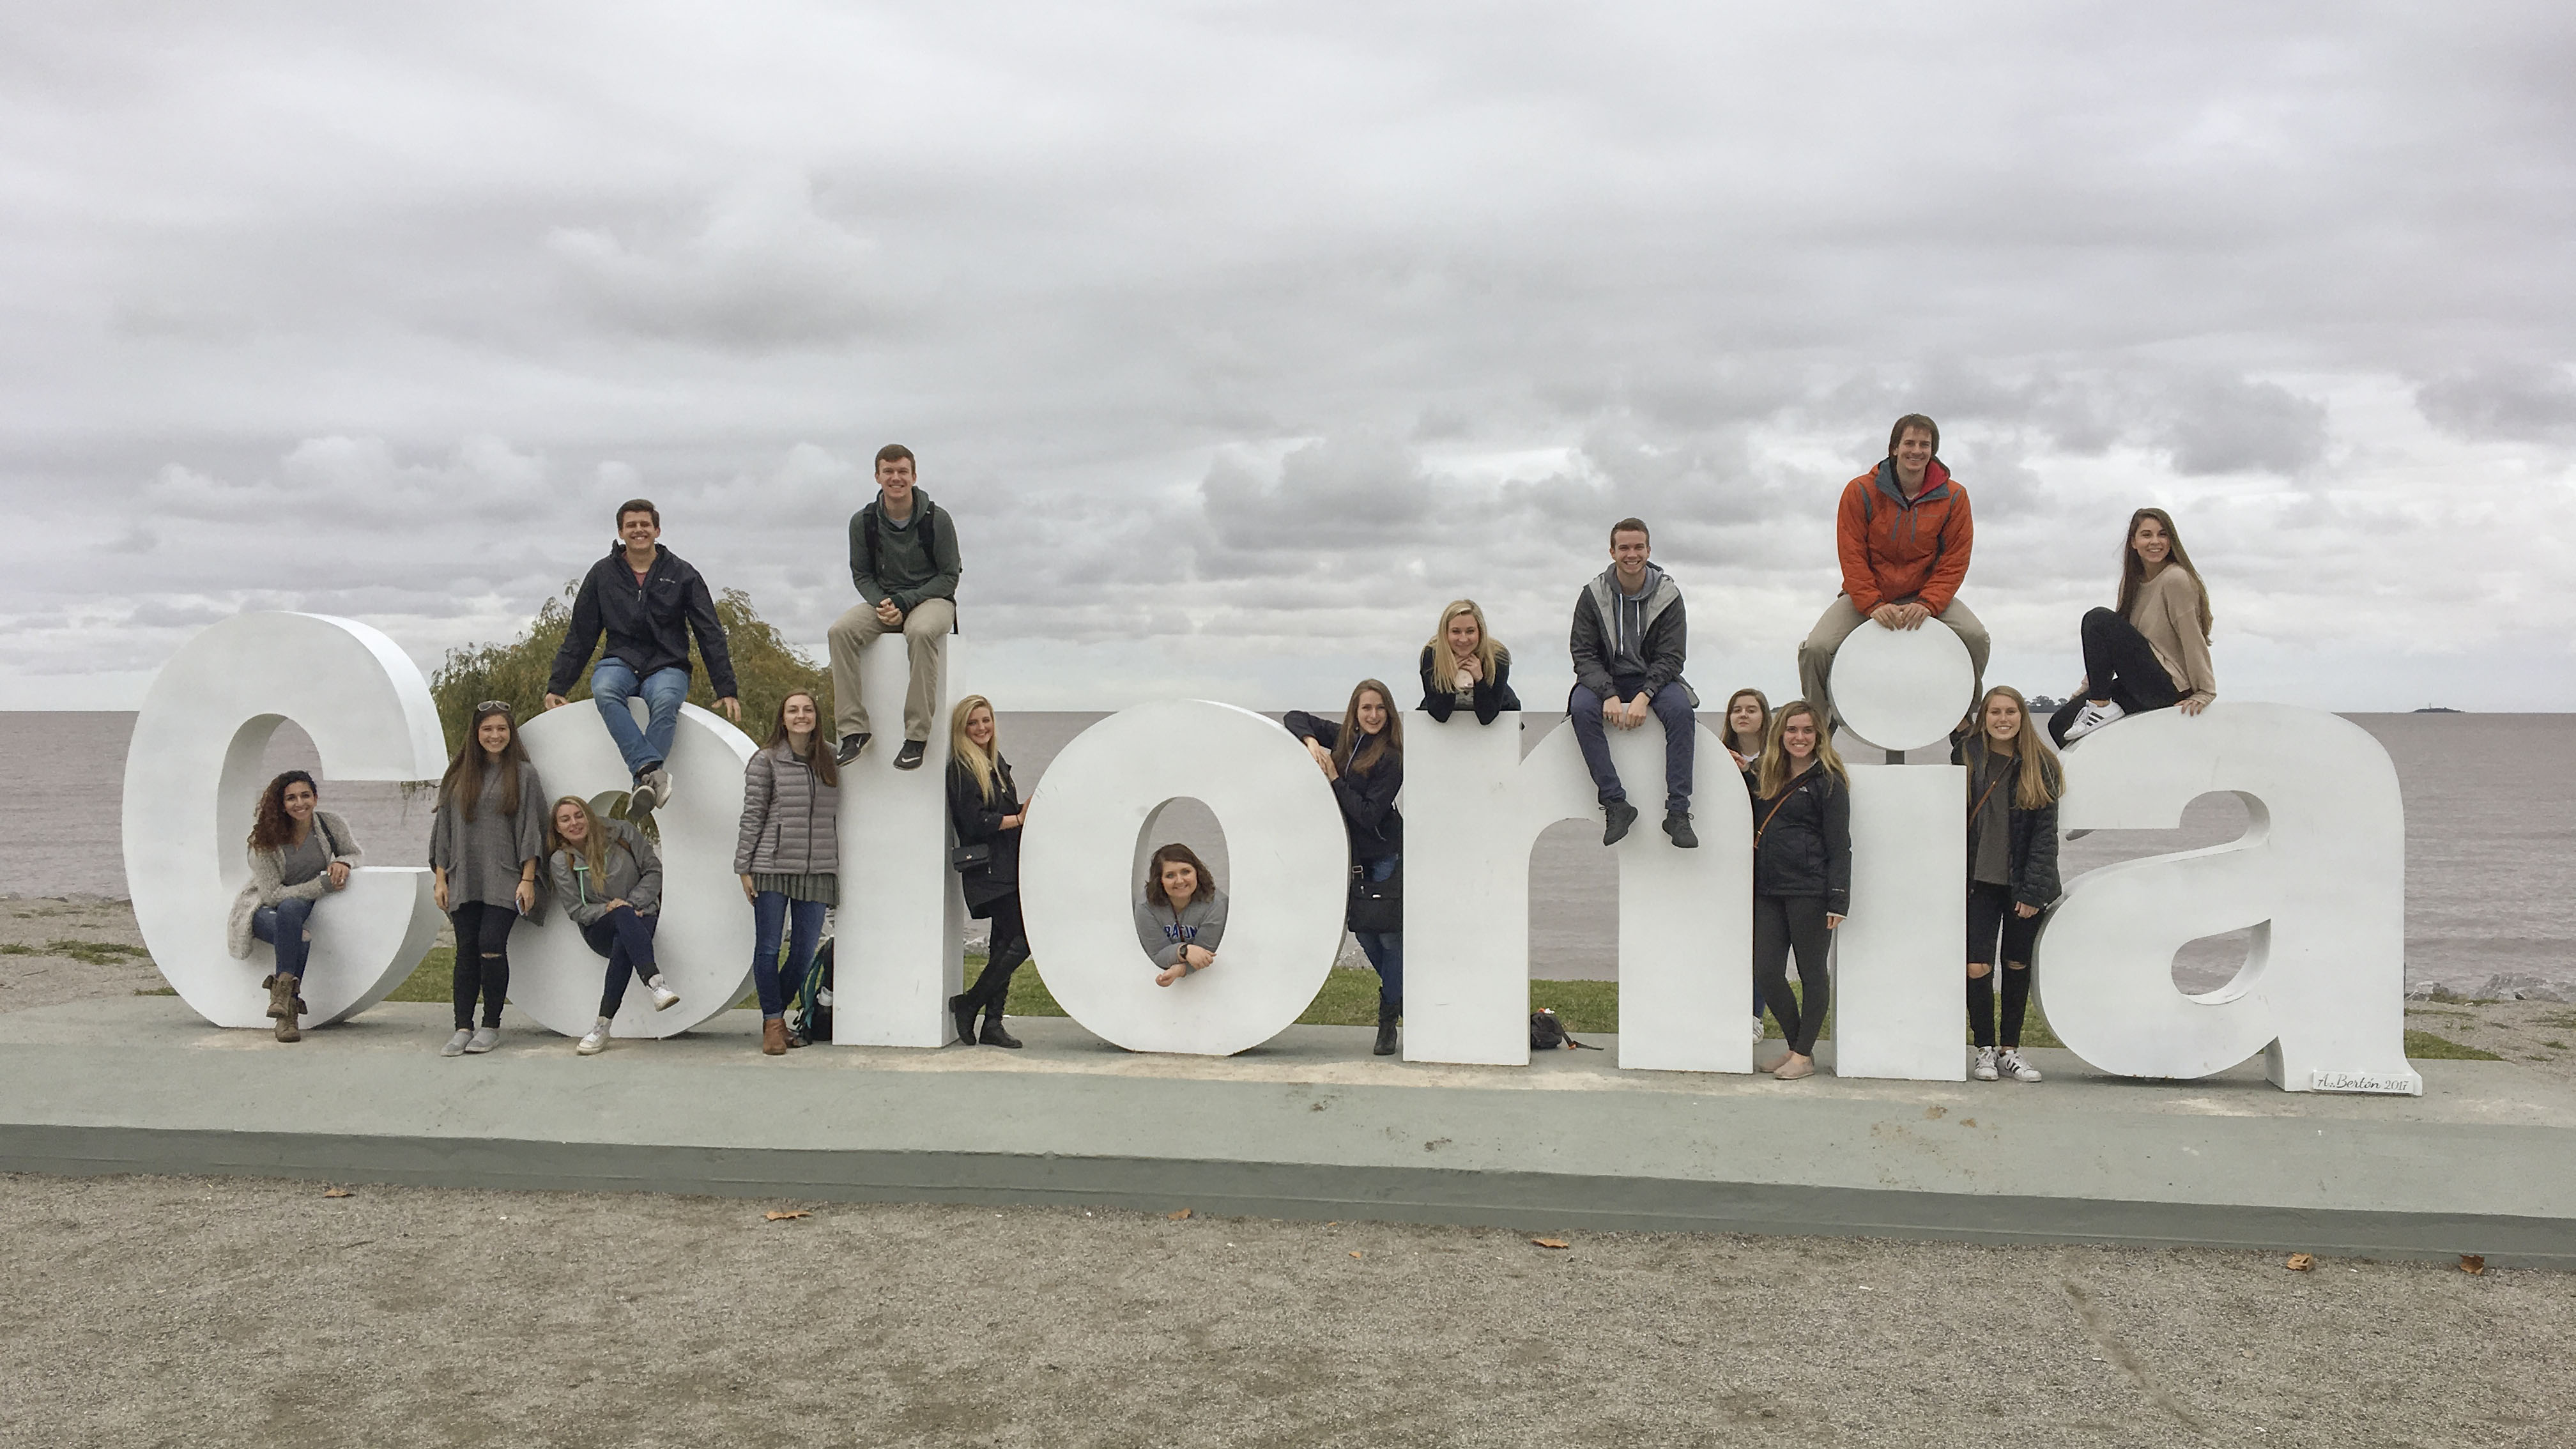 Devon Collins and her fellow students on their excursion to Colonia in Uruguay.